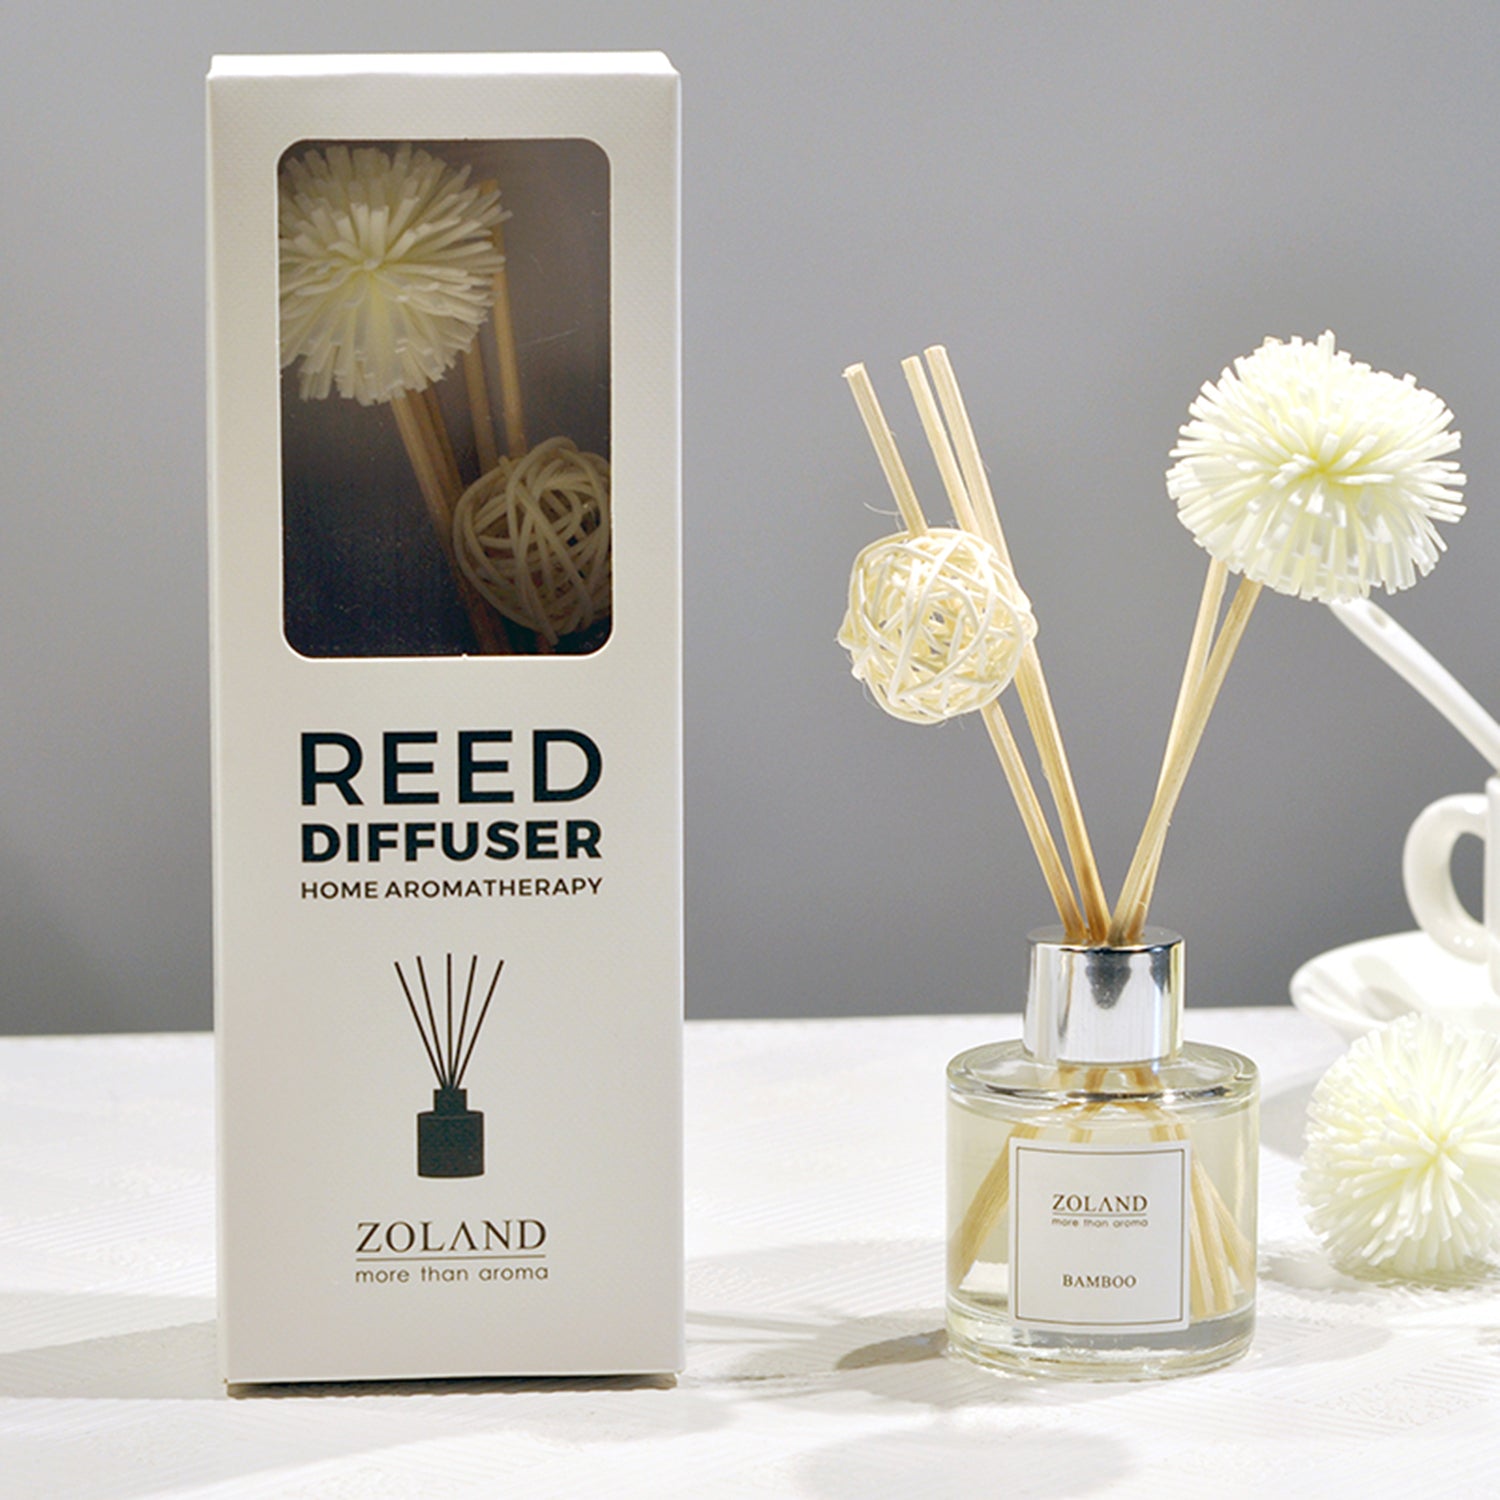 ZOLAND Reed Diffuser 50ML Premium Essential Oil Aromatherapy Round Bottle with Reed Stick, Sola Flower and Rattan Ball Reed Diffuser ZOLAND 